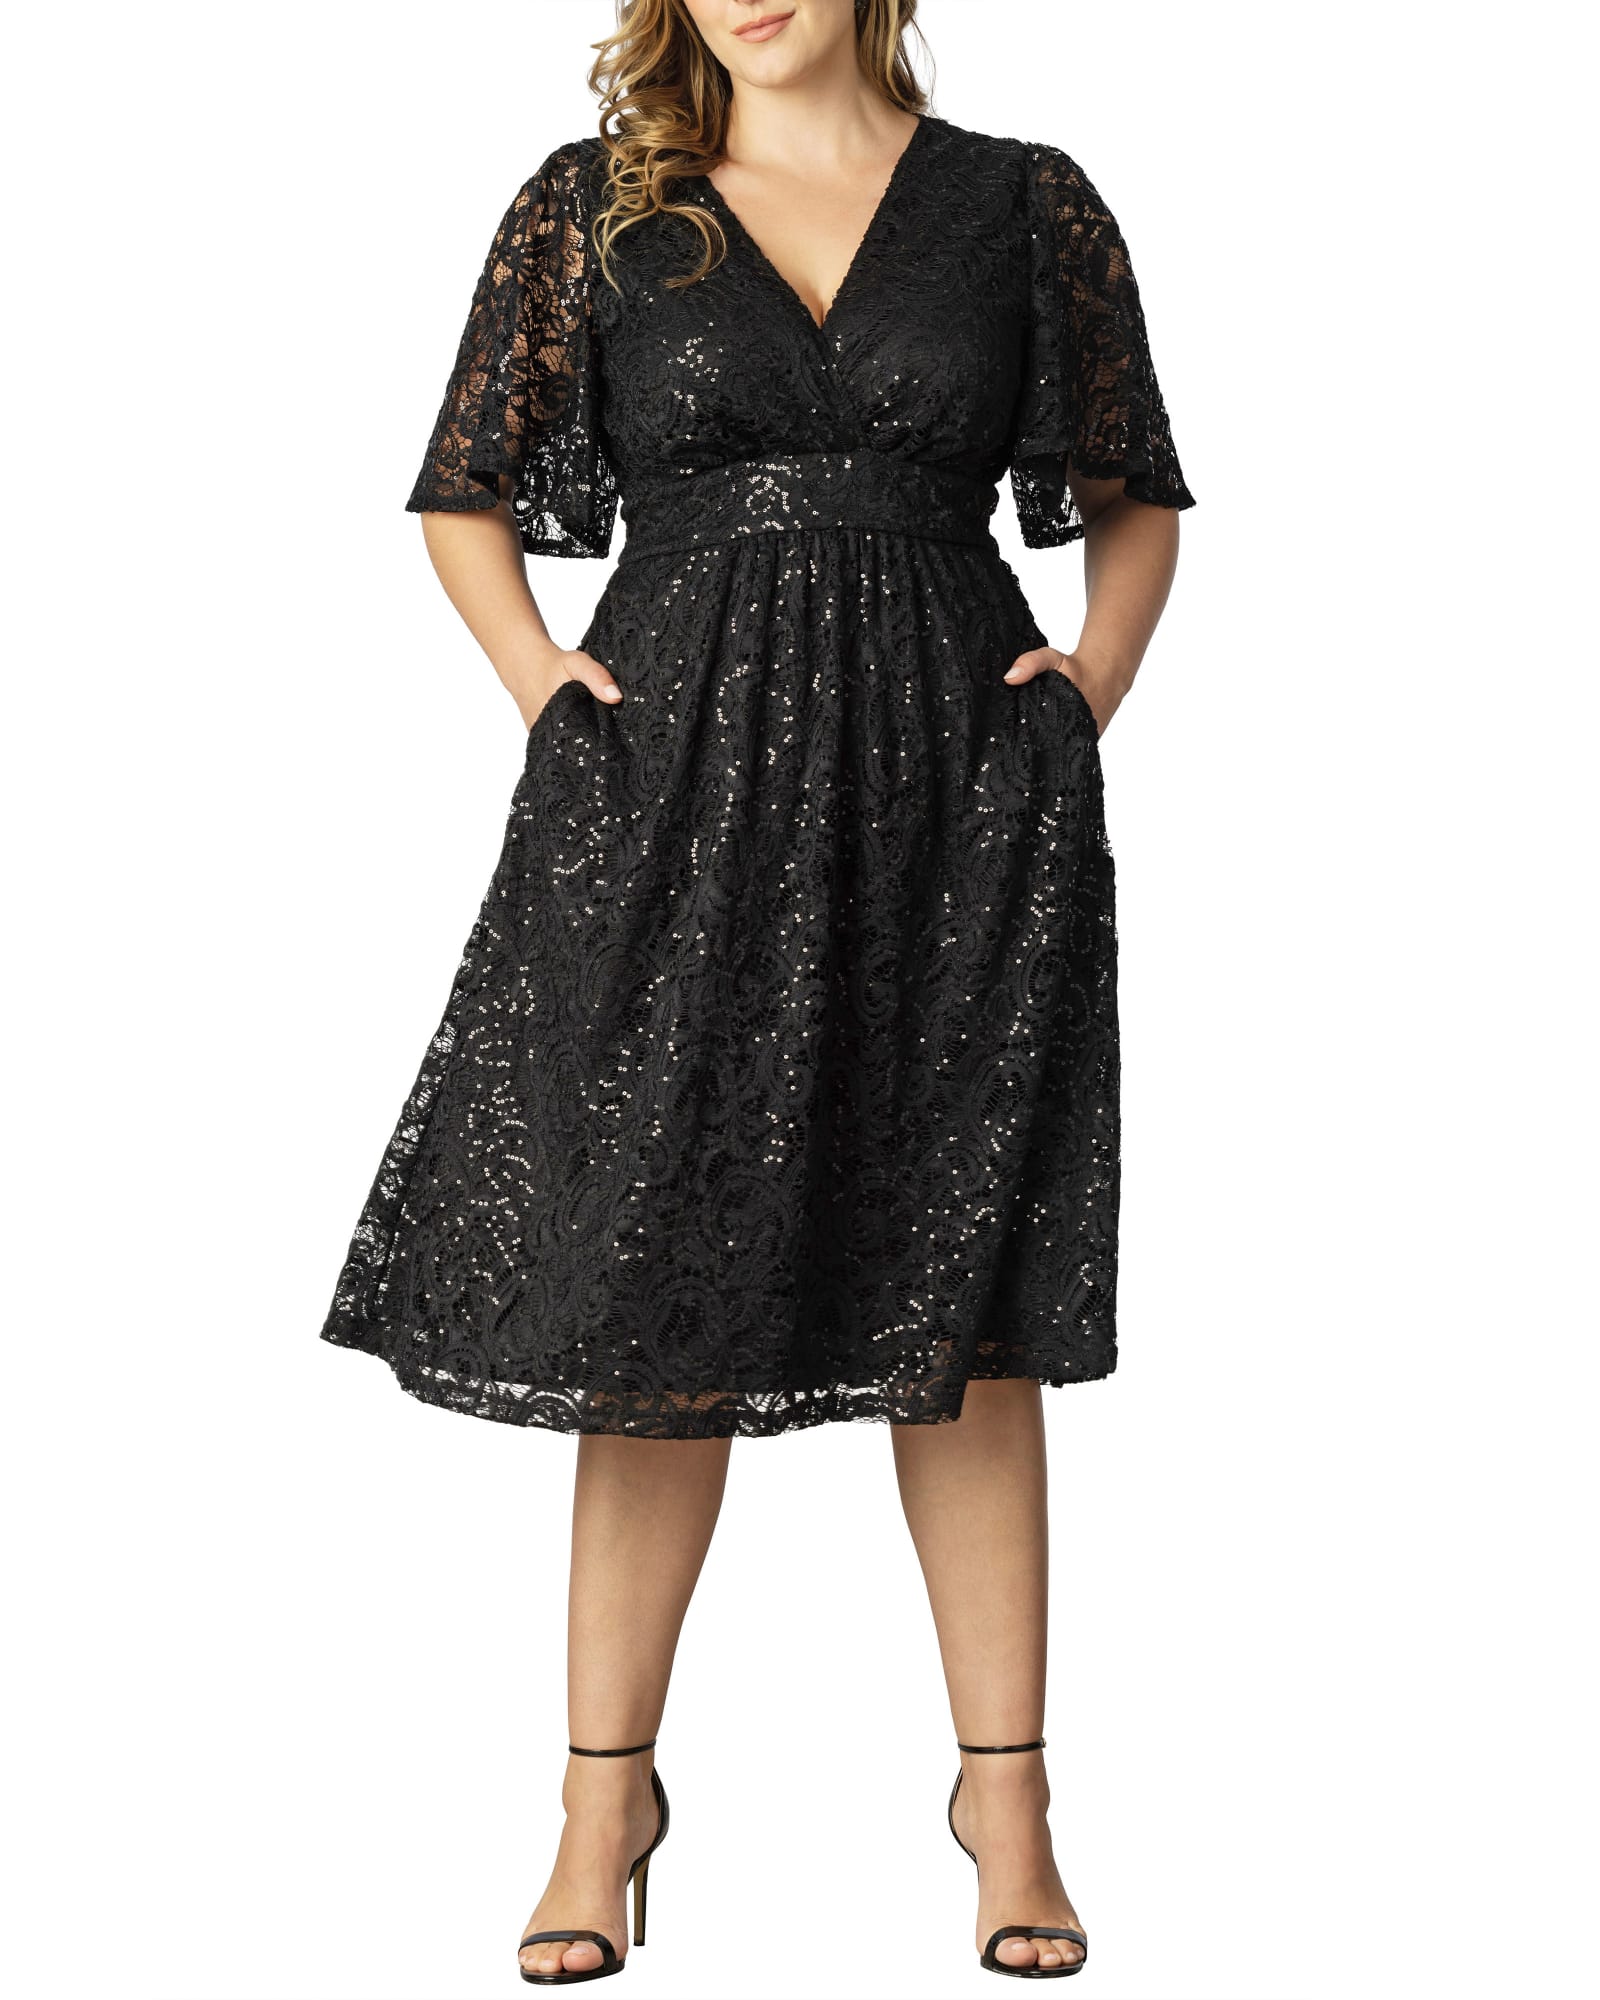 Starry Sequined Lace Cocktail Dress | ONYX